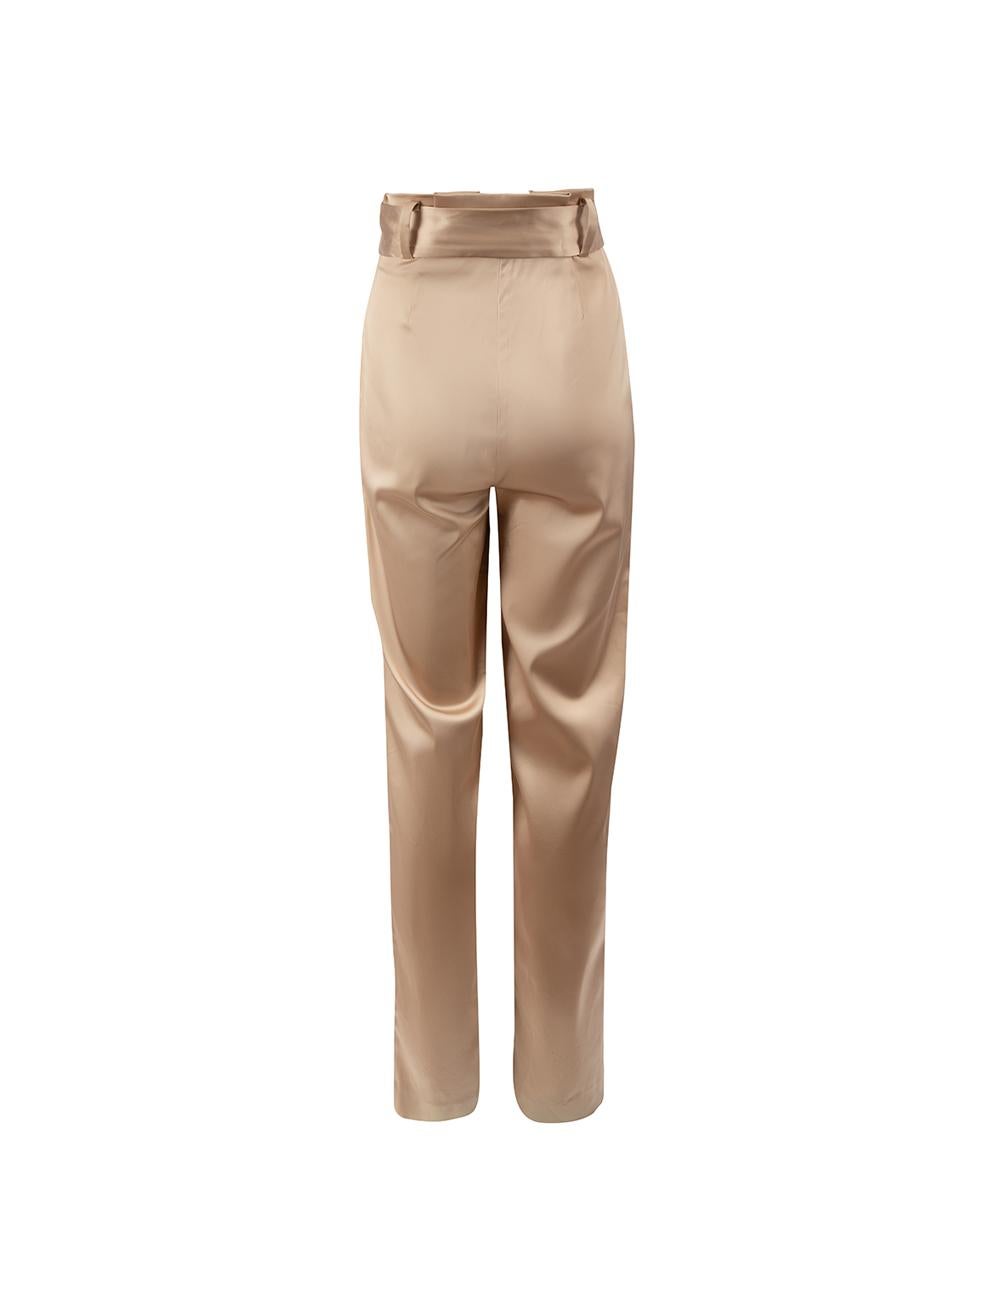 Lapointe Beige Pleat Detail Belted Trousers Size XS In Excellent Condition For Sale In London, GB